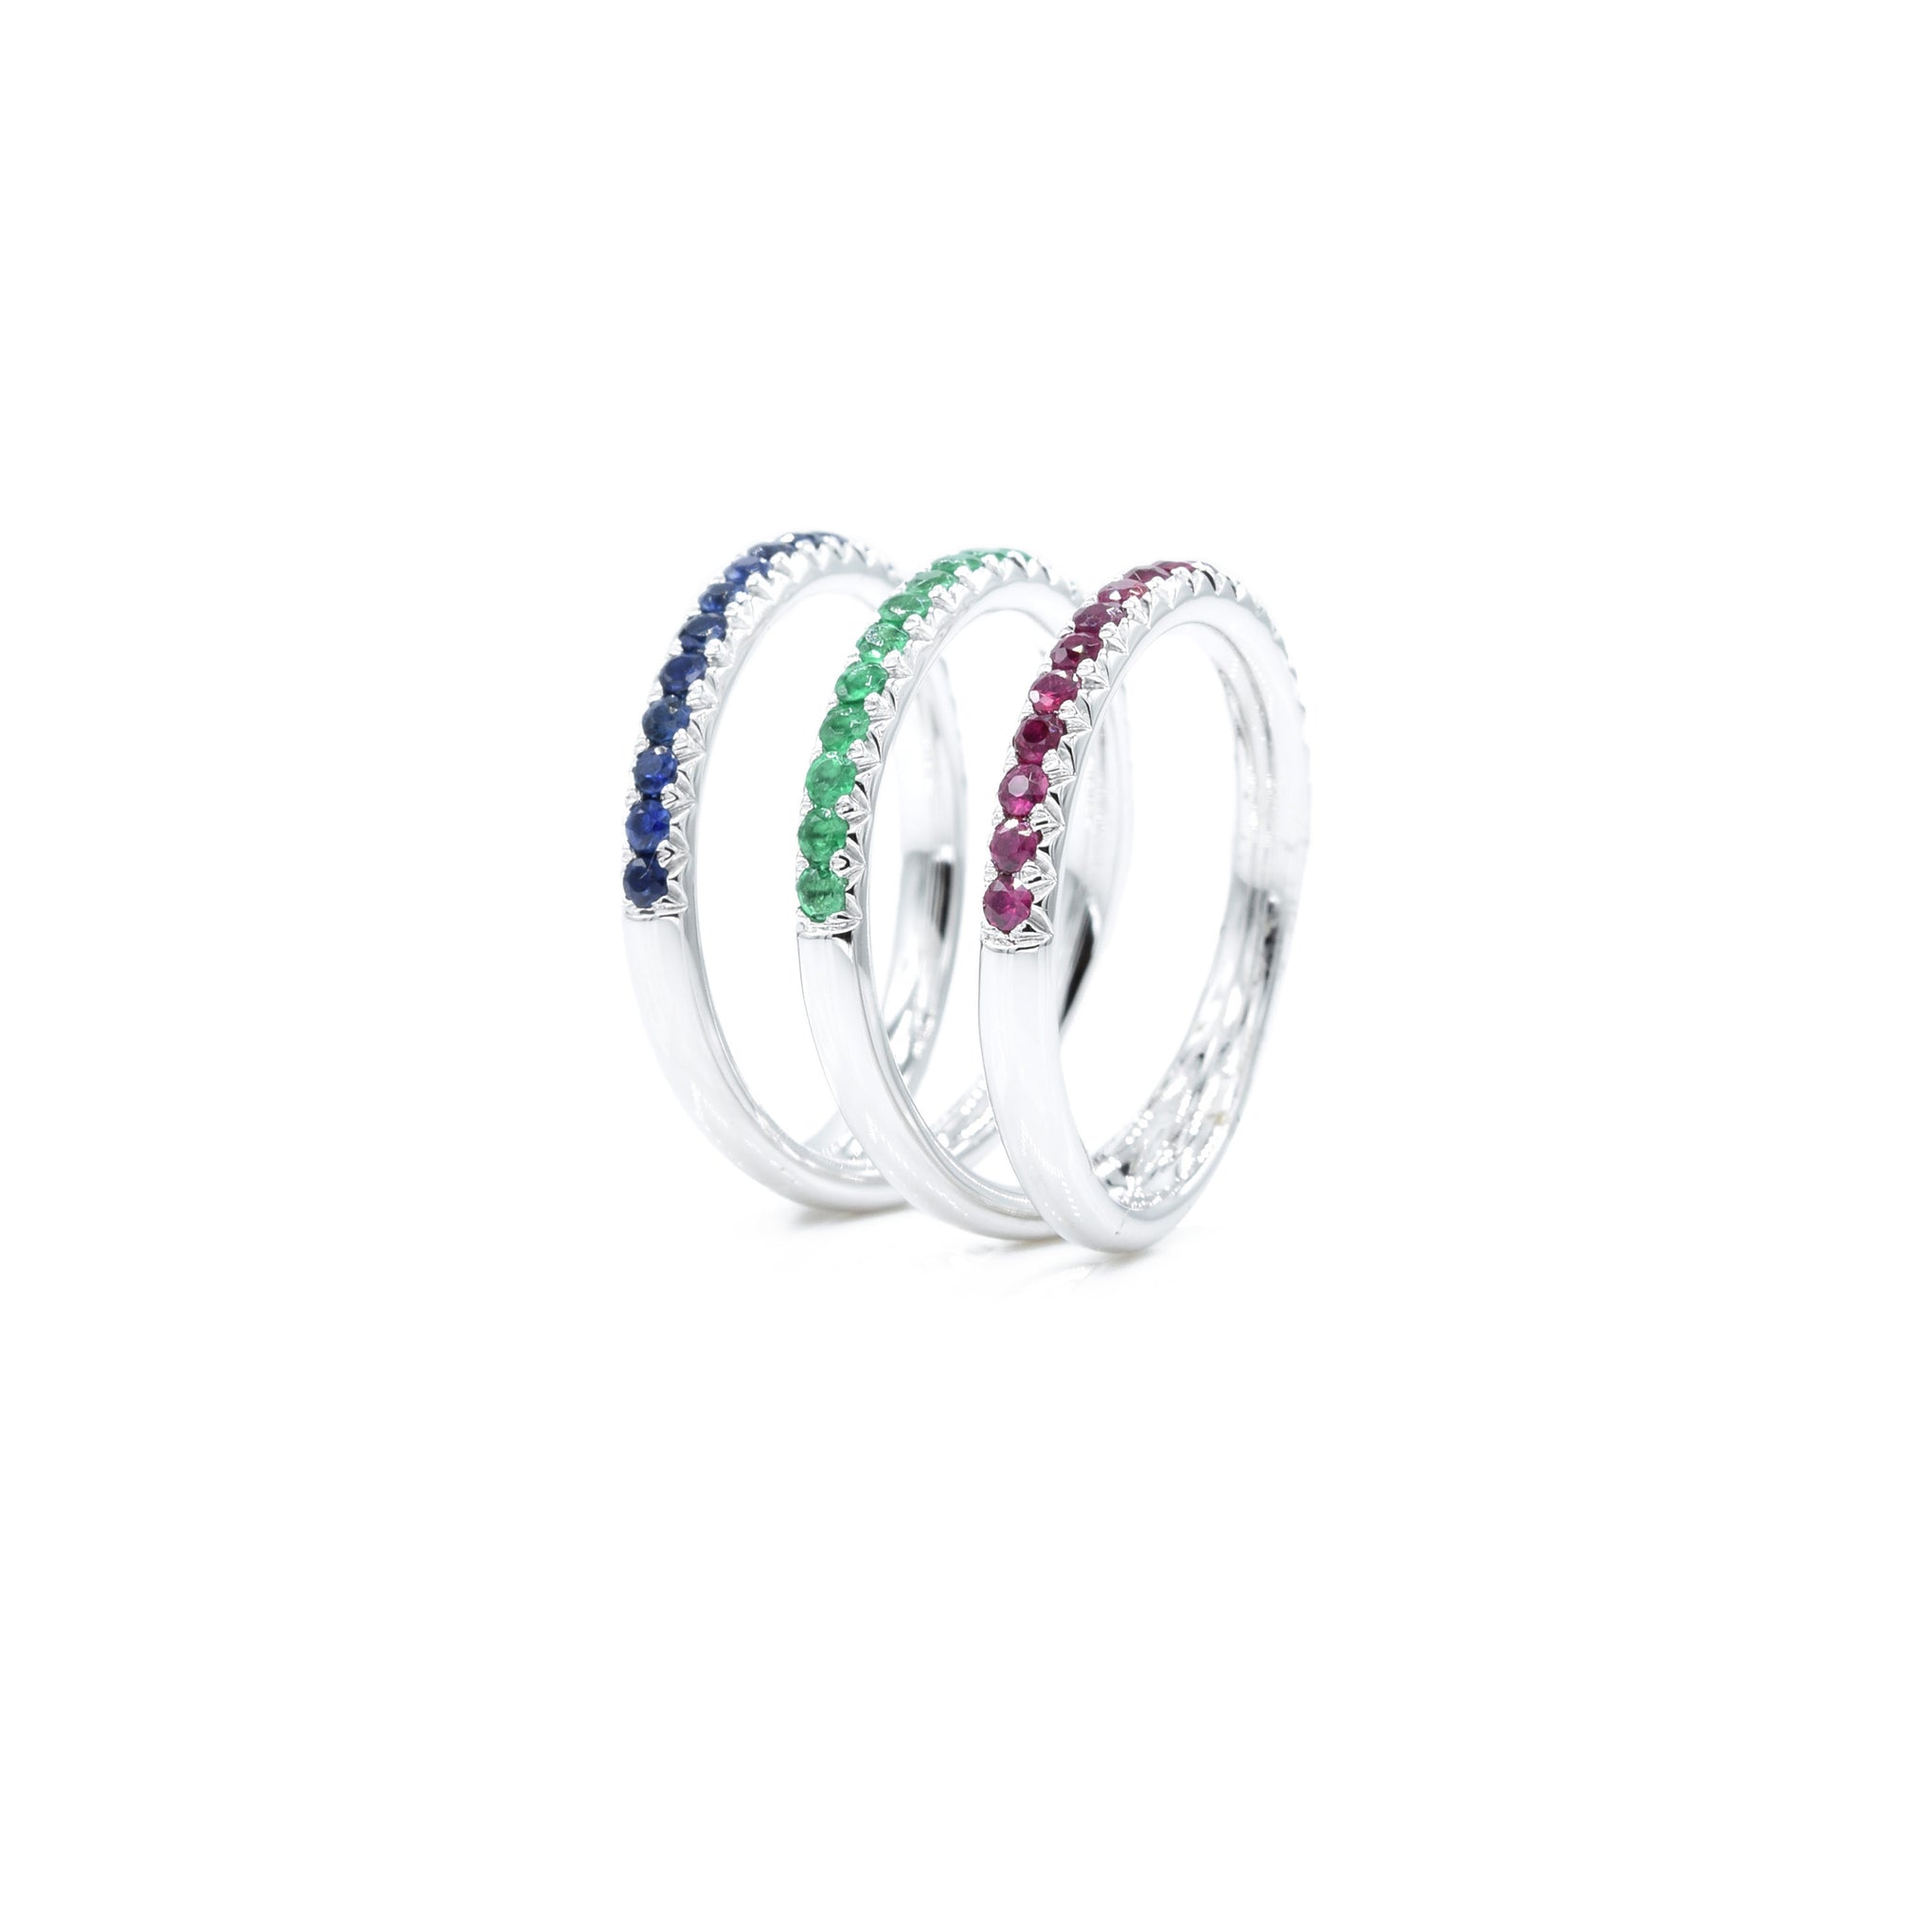 18kt White Gold Ruby, Emerald, and Sapphire Triple Ring